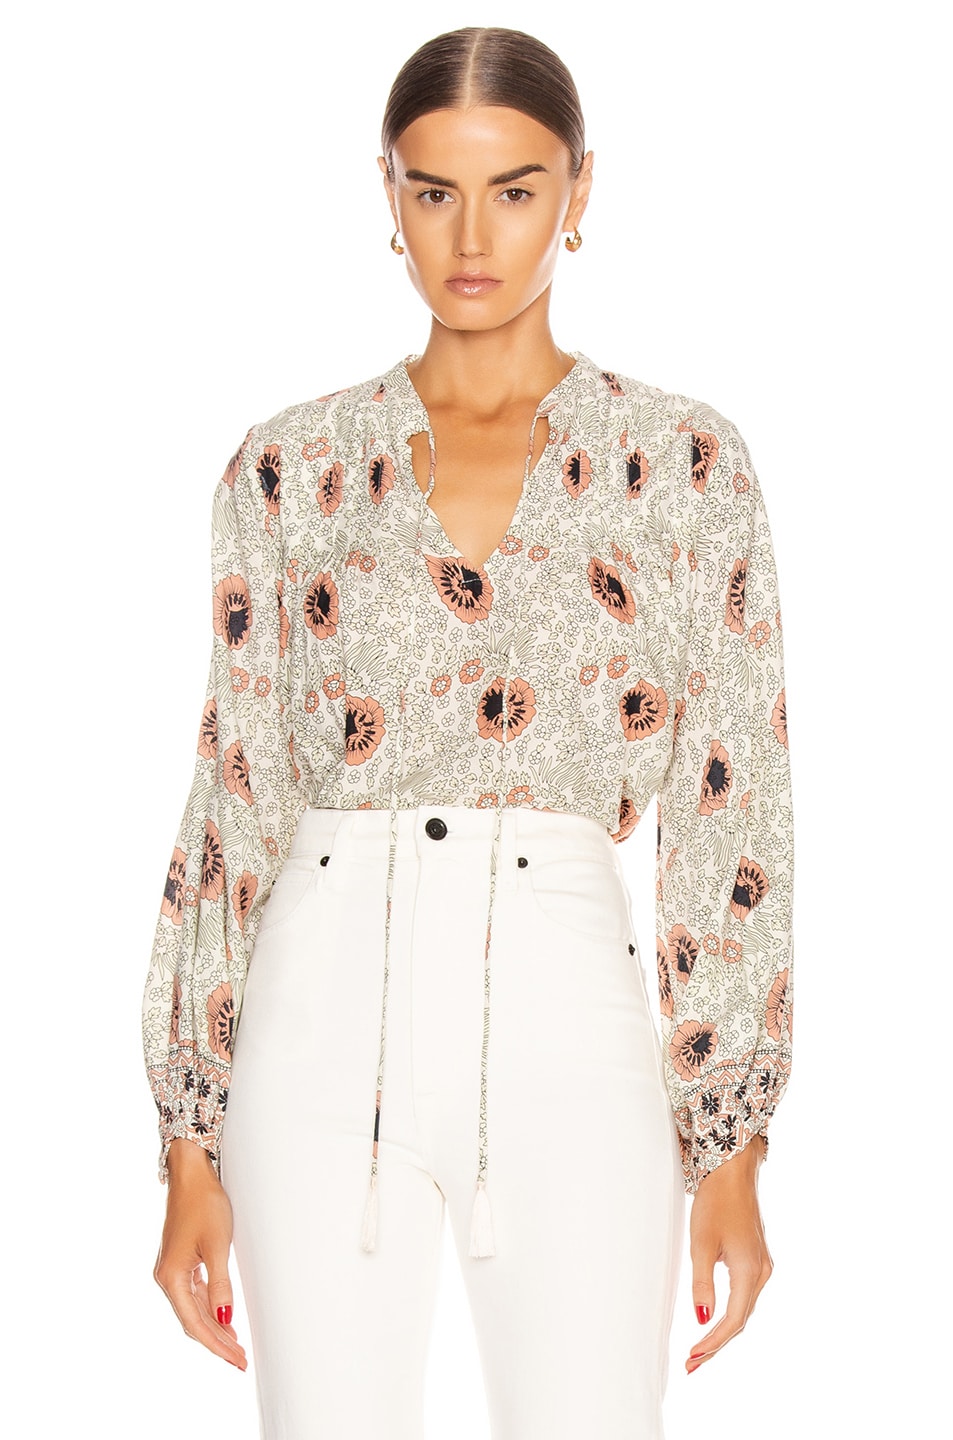 Image 1 of Natalie Martin Lizzy Shirt in Vintage Flowers Apricot